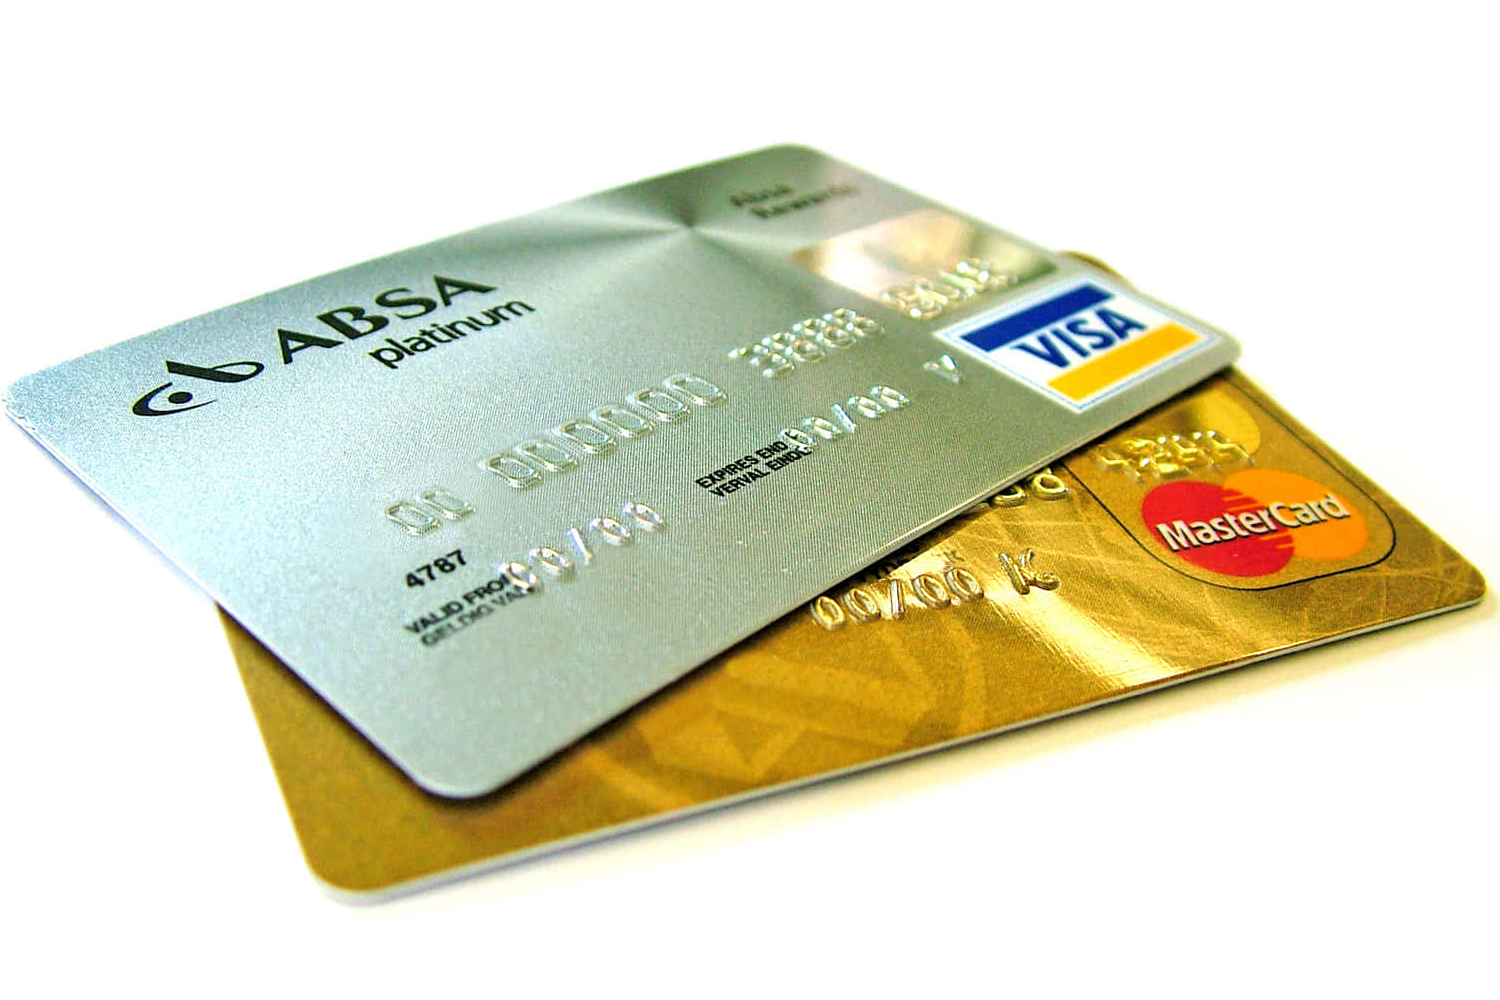 Luxury Card is a Premium Credit Card in the Global Market of credit cards.